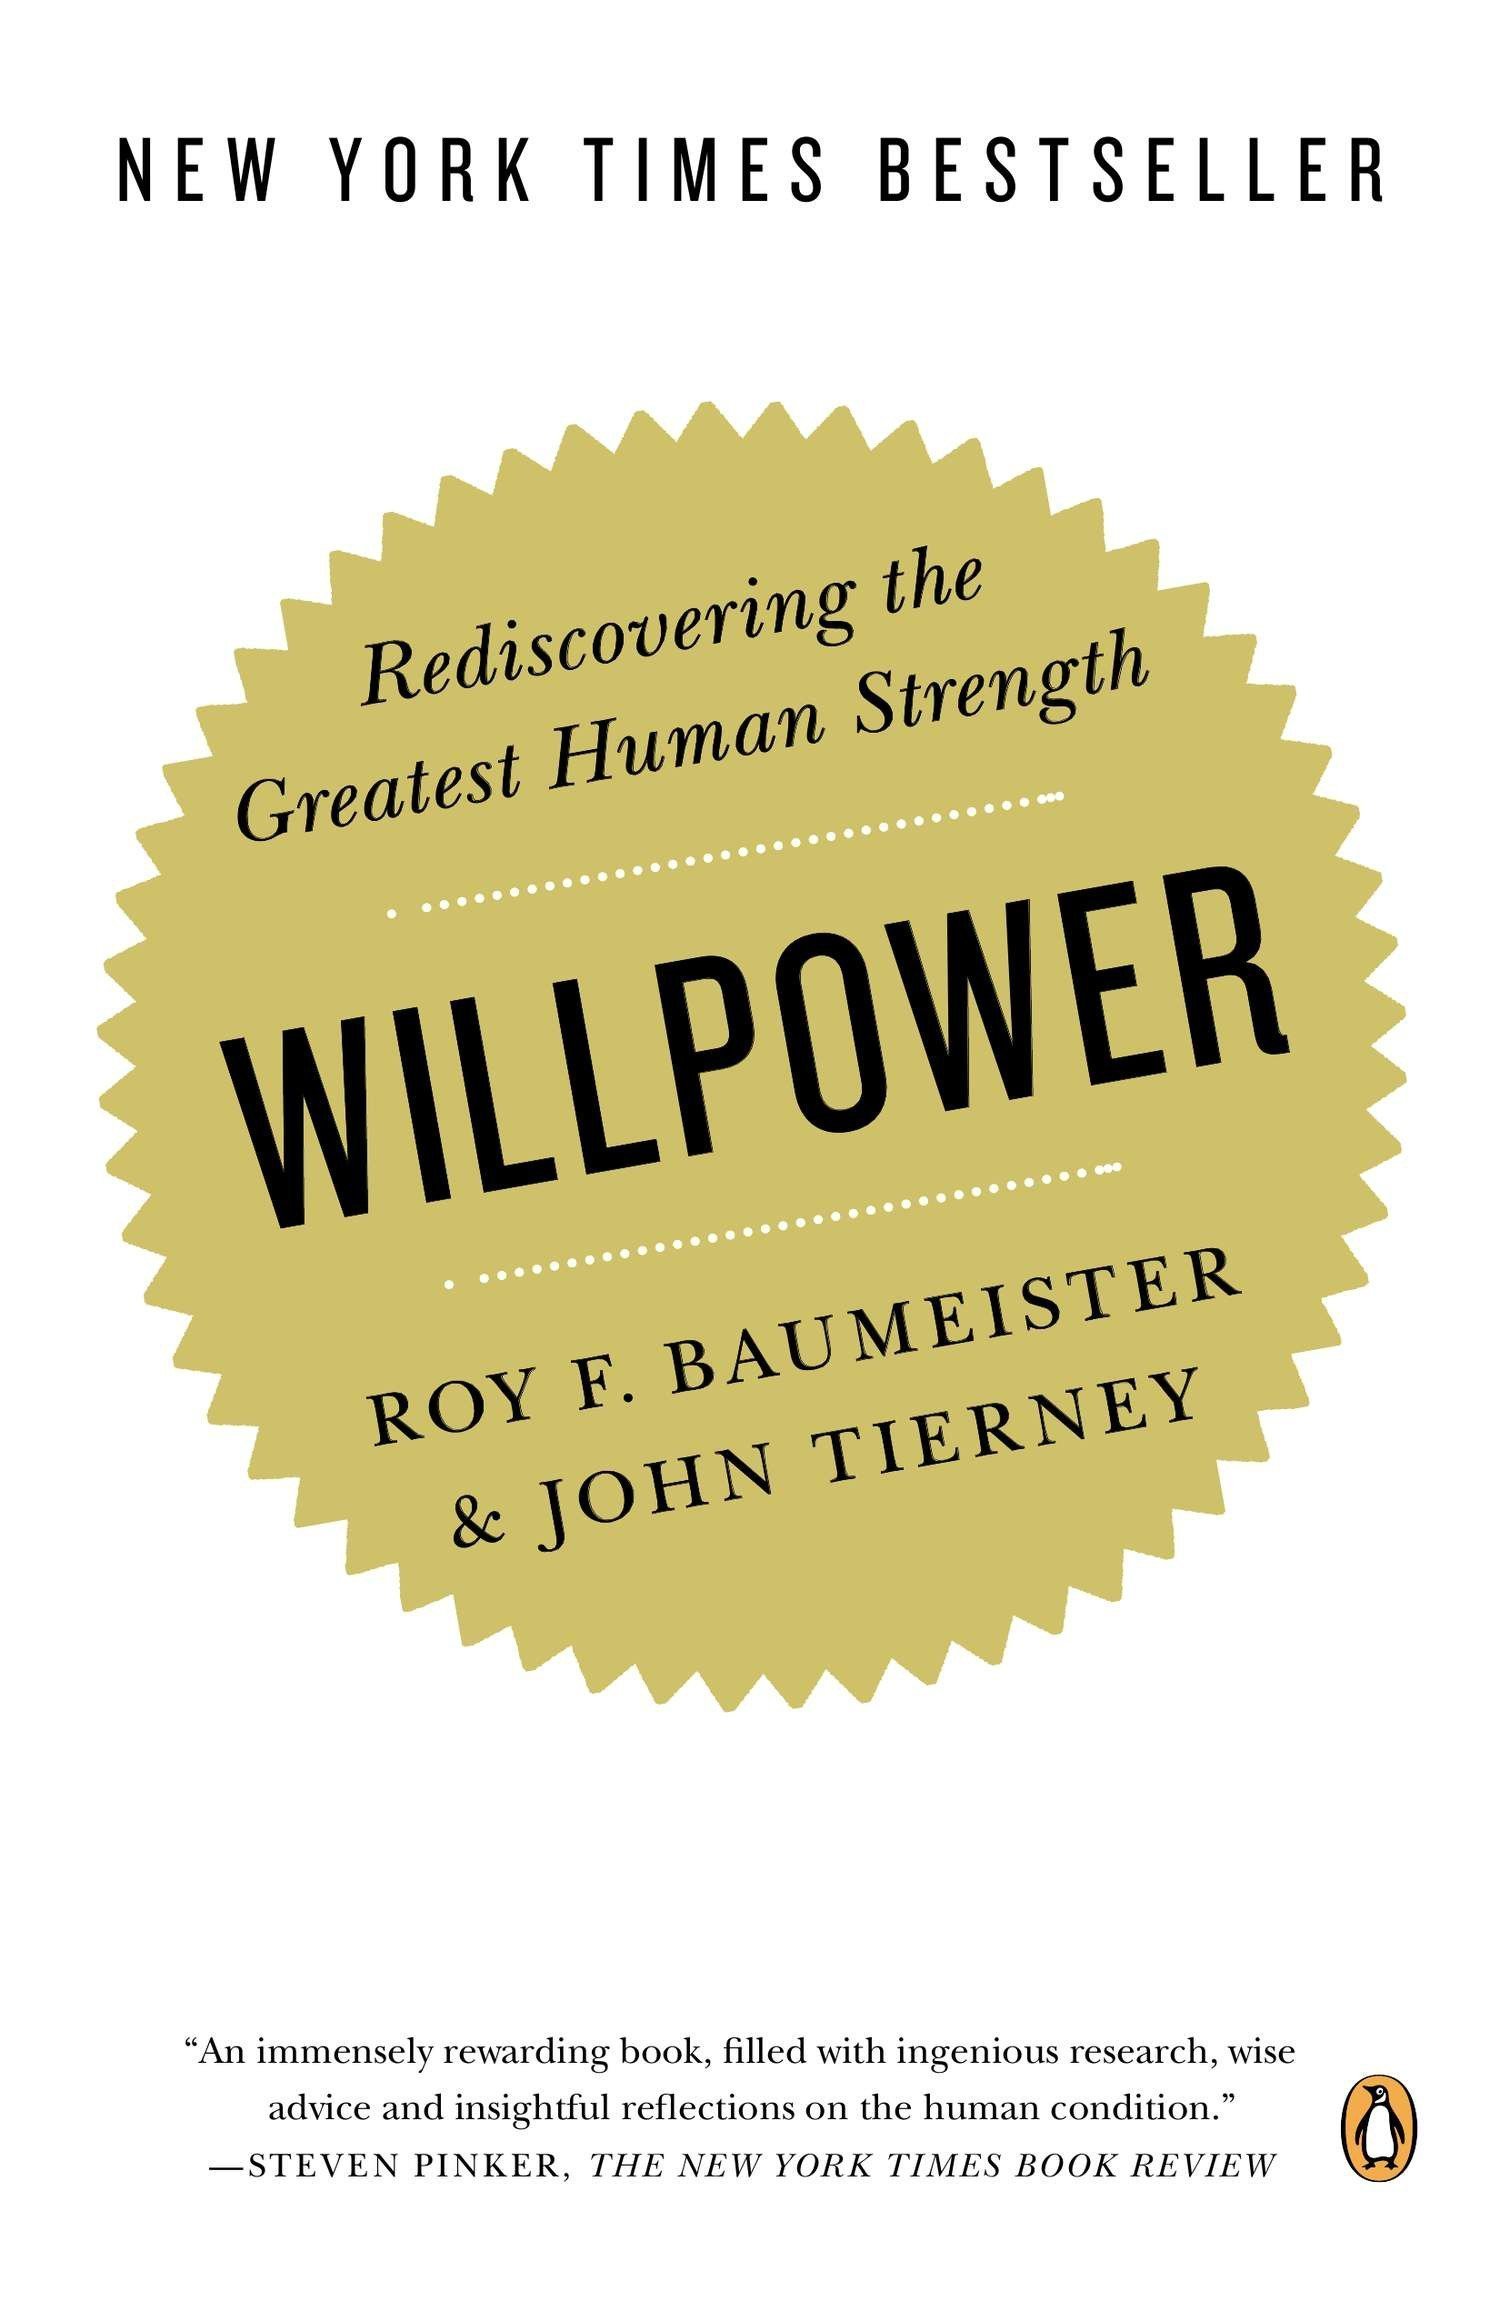 Willpower by by Roy F. Baumeister and John Tierney